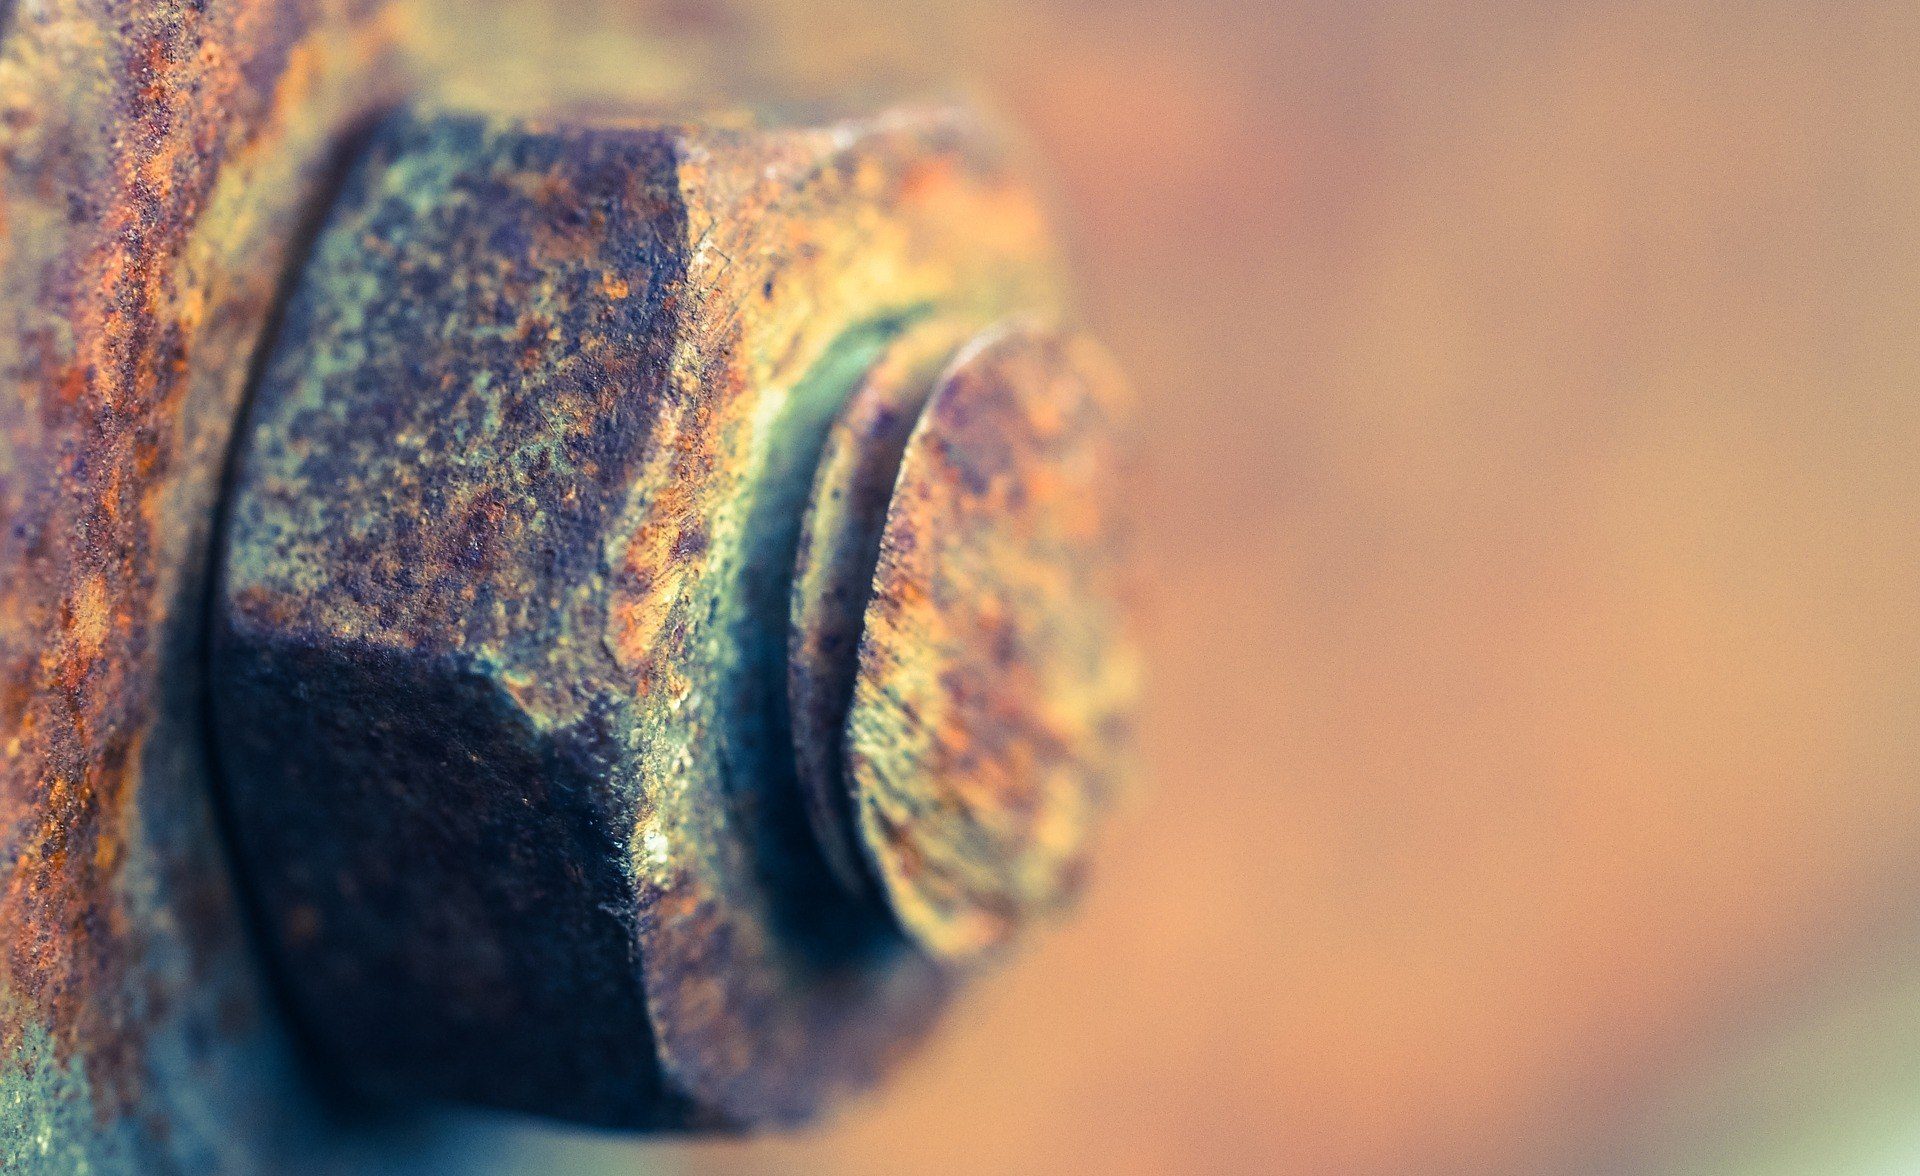 rusted bolt nut